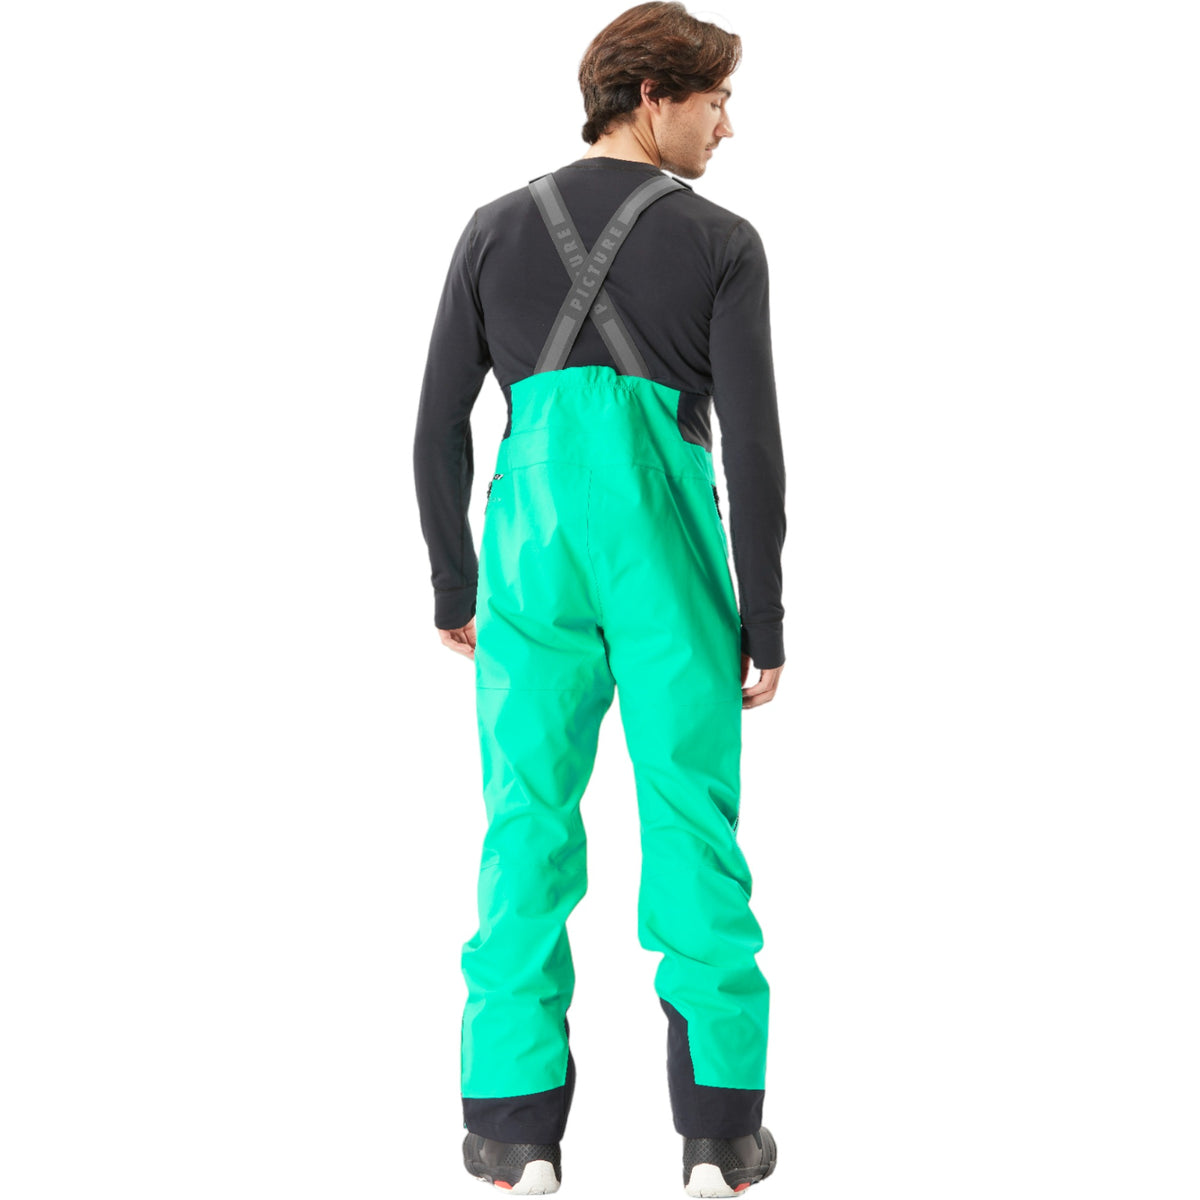 PICTURE-WELCOME 3L BIB PANT SPECTRA GREEN - Ski trousers